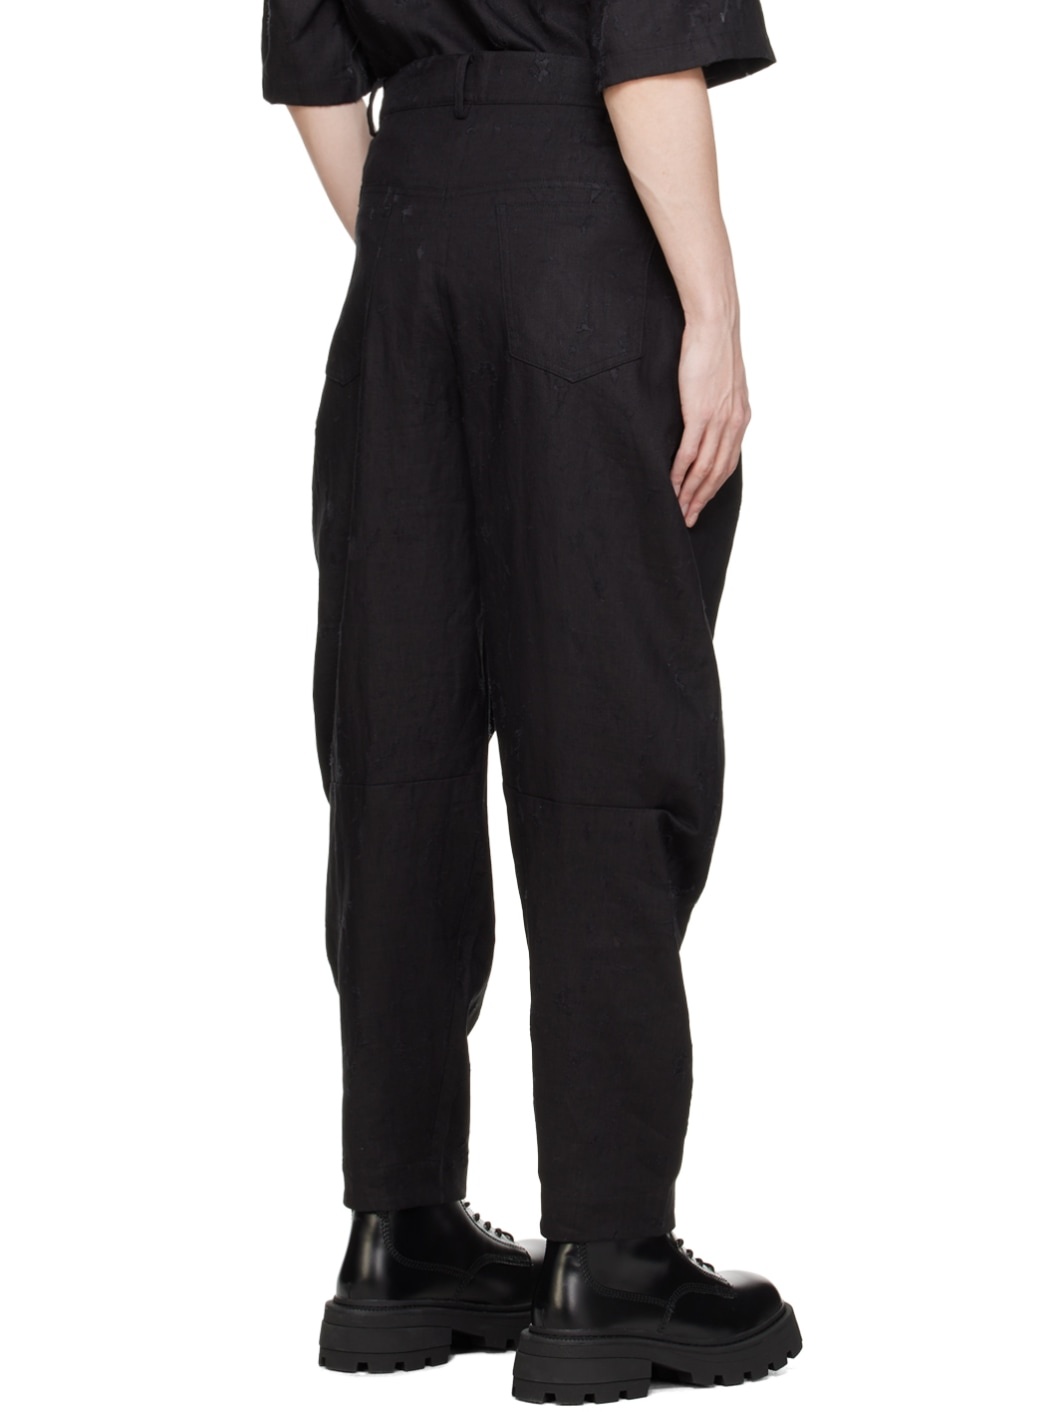 Black Distressed Trousers - 3